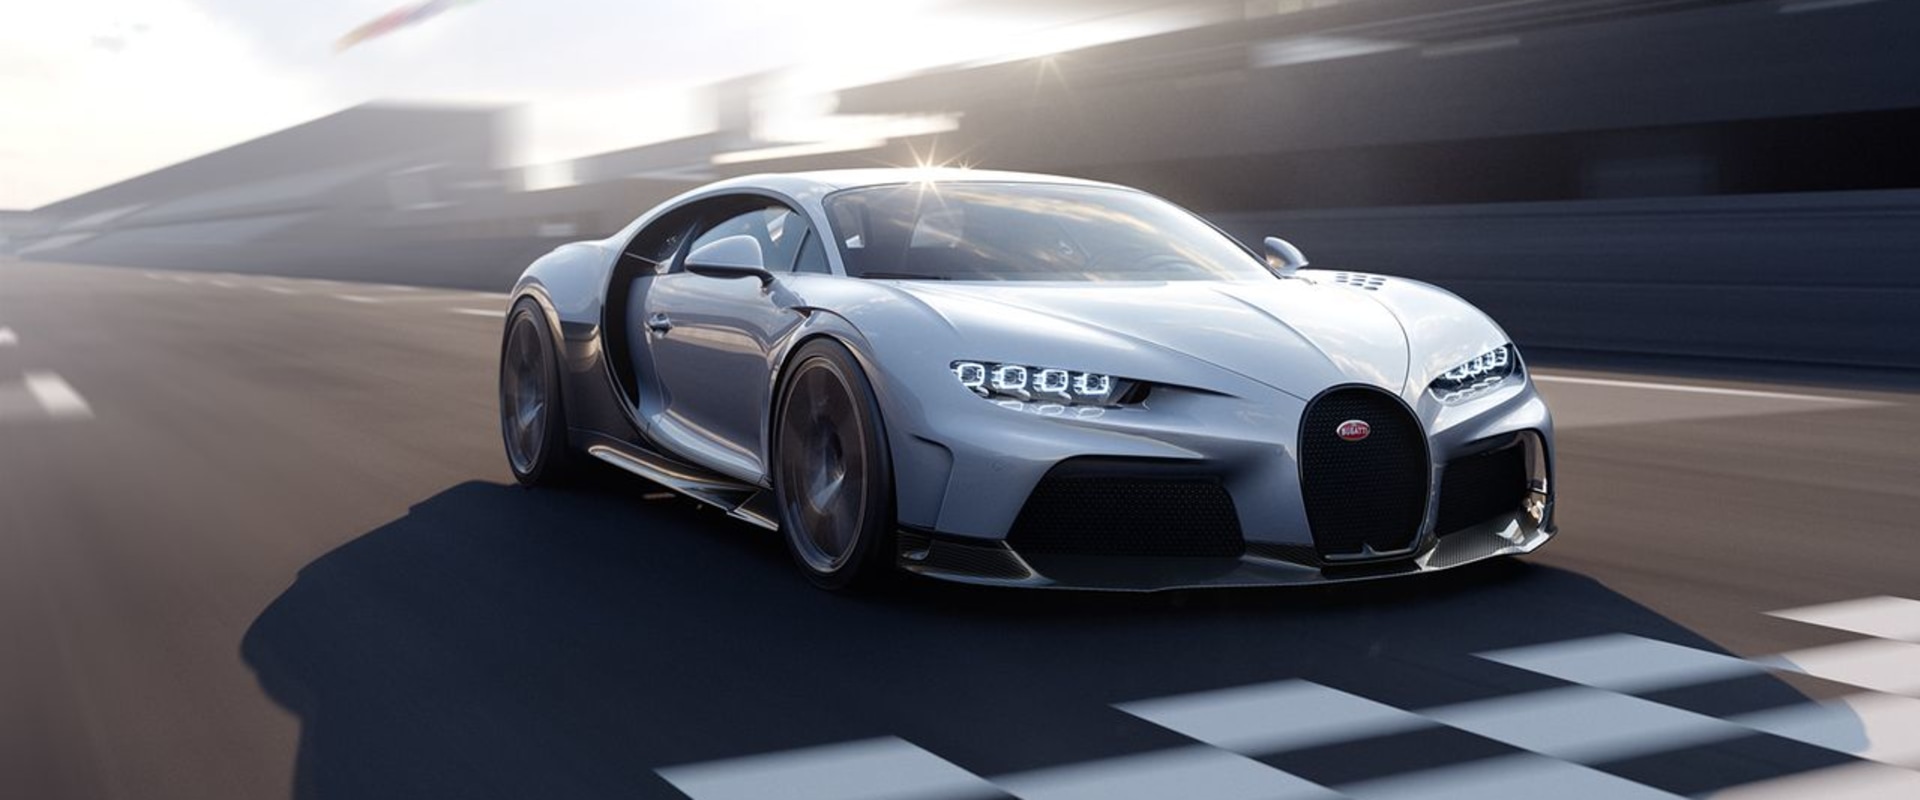 Explore the Luxury and Power of the Bugatti